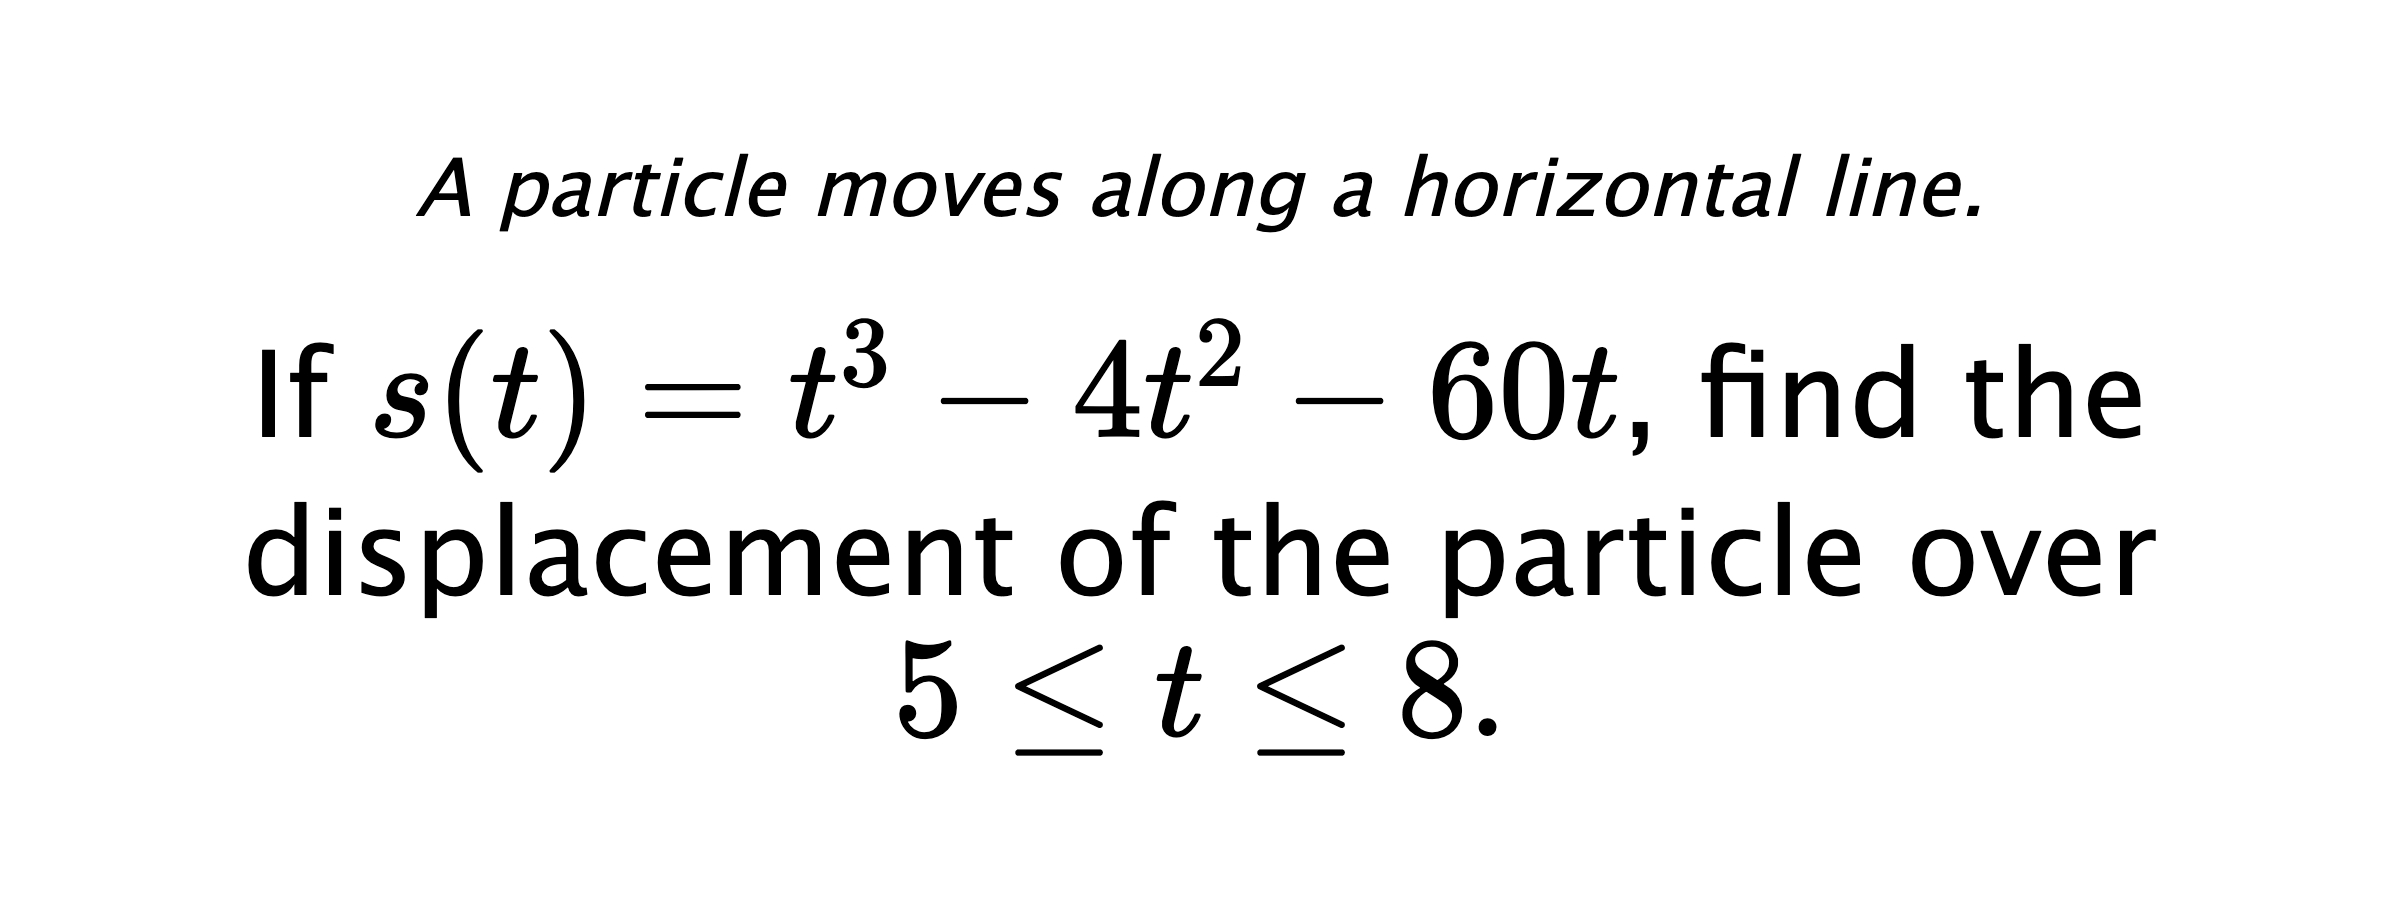 A particle moves along a horizontal line. If $ s(t)=t^3-4t^2-60t $, find the displacement of the particle over $ 5 \leq t \leq 8. $